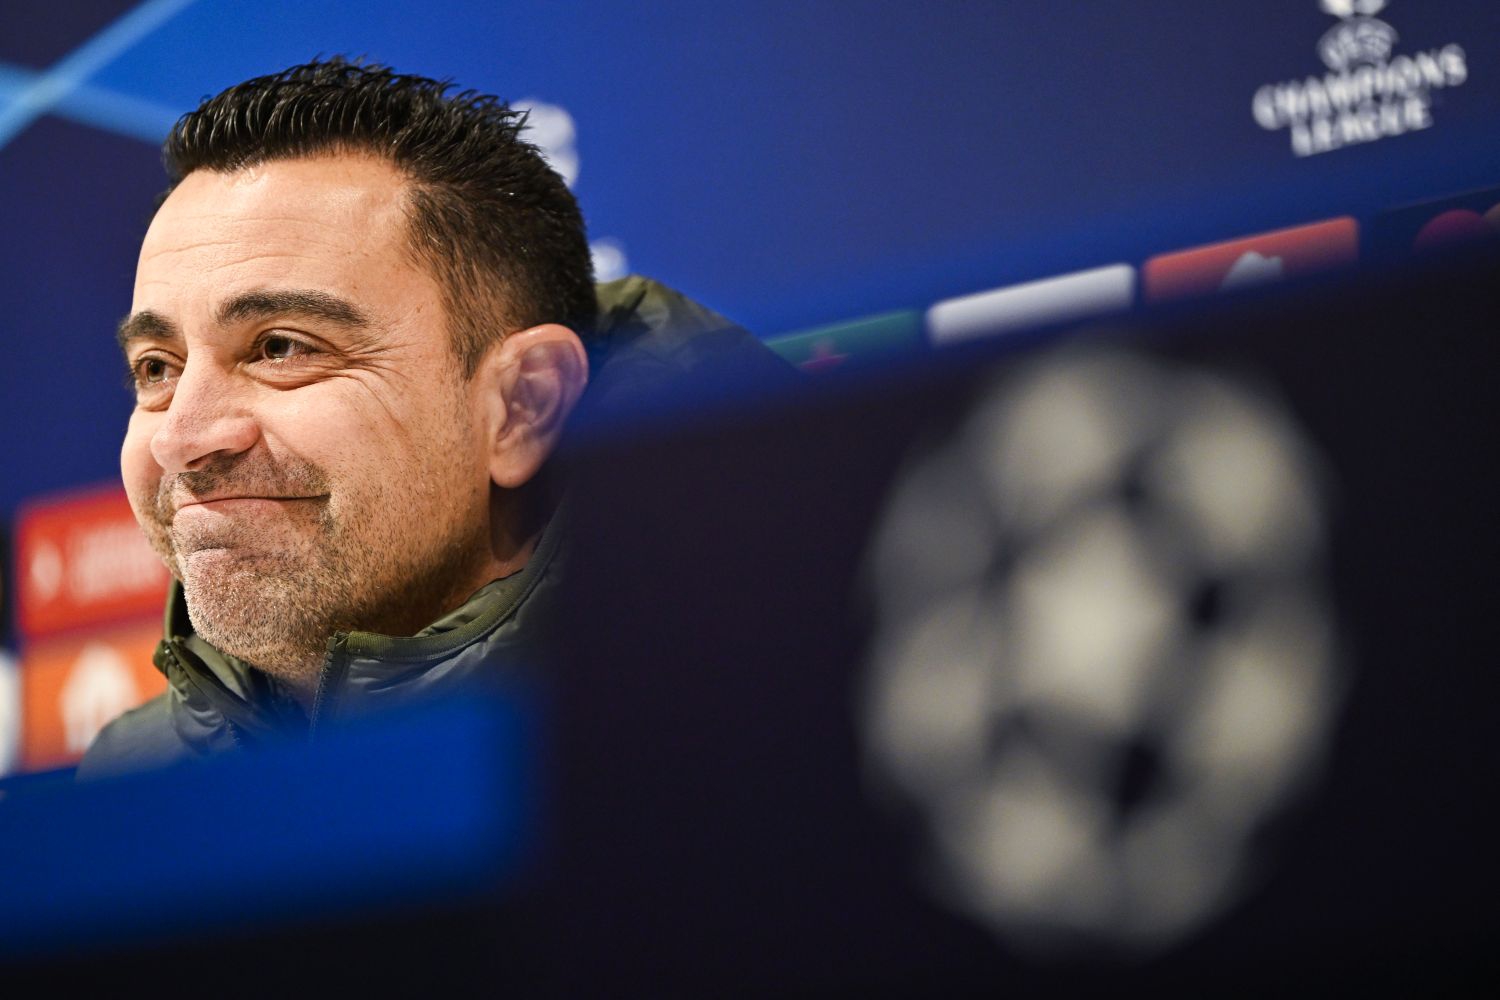 Xavi is linked to a new club.  It will help rise from the ashes